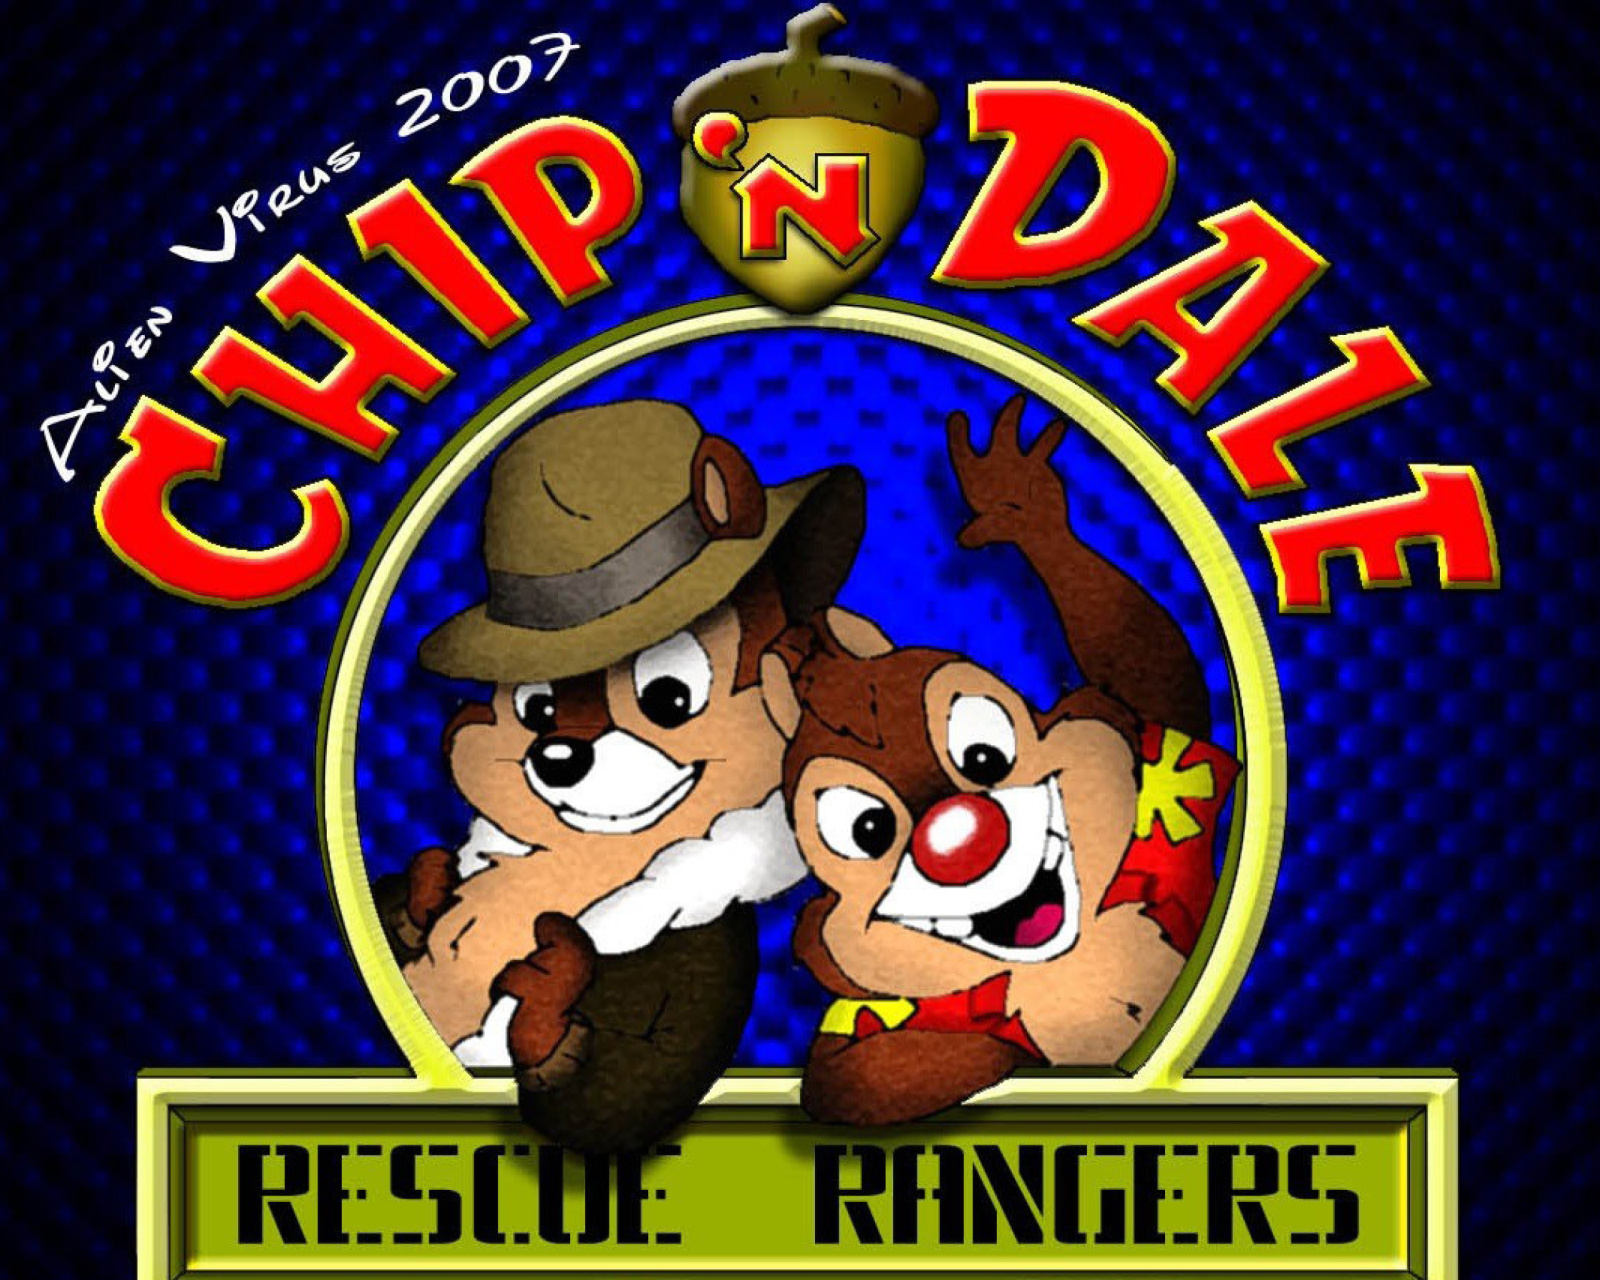 Chip and Dale Cartoon wallpaper 1600x1280